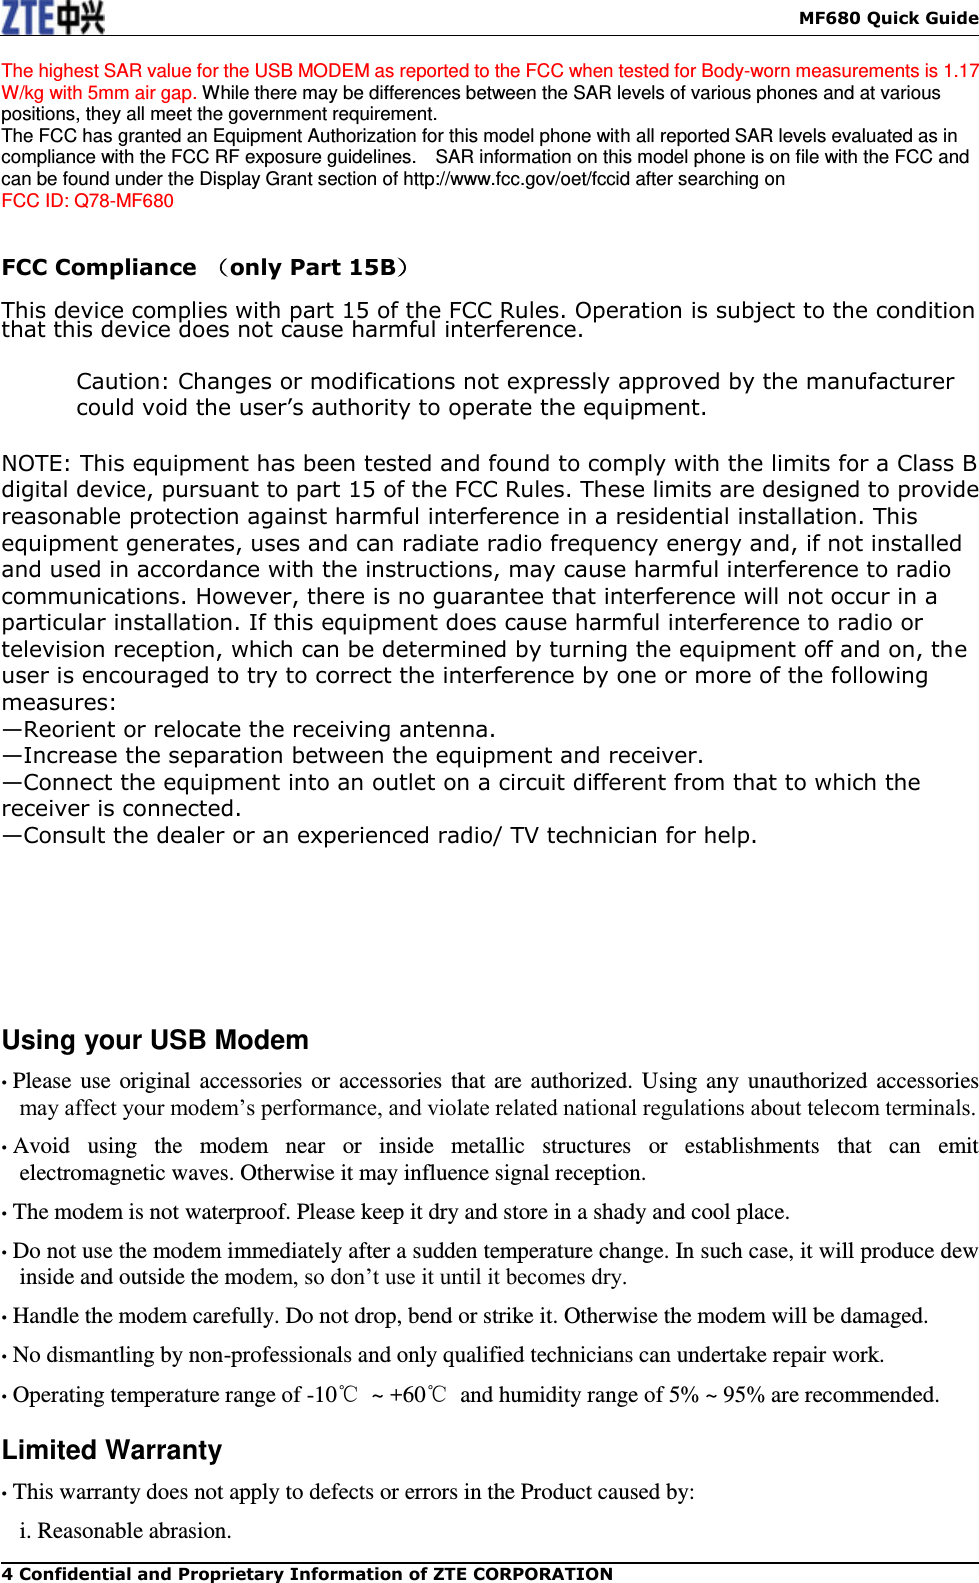    MF680 Quick Guide 4 Confidential and Proprietary Information of ZTE CORPORATION The highest SAR value for the USB MODEM as reported to the FCC when tested for Body-worn measurements is 1.17 W/kg with 5mm air gap. While there may be differences between the SAR levels of various phones and at various positions, they all meet the government requirement. The FCC has granted an Equipment Authorization for this model phone with all reported SAR levels evaluated as in compliance with the FCC RF exposure guidelines.    SAR information on this model phone is on file with the FCC and can be found under the Display Grant section of http://www.fcc.gov/oet/fccid after searching on   FCC ID: Q78-MF680   FCC Compliance  （only Part 15B）  This device complies with part 15 of the FCC Rules. Operation is subject to the condition that this device does not cause harmful interference.  Caution: Changes or modifications not expressly approved by the manufacturer could void the user’s authority to operate the equipment.  NOTE: This equipment has been tested and found to comply with the limits for a Class B digital device, pursuant to part 15 of the FCC Rules. These limits are designed to provide reasonable protection against harmful interference in a residential installation. This equipment generates, uses and can radiate radio frequency energy and, if not installed and used in accordance with the instructions, may cause harmful interference to radio communications. However, there is no guarantee that interference will not occur in a particular installation. If this equipment does cause harmful interference to radio or television reception, which can be determined by turning the equipment off and on, the user is encouraged to try to correct the interference by one or more of the following measures: —Reorient or relocate the receiving antenna. —Increase the separation between the equipment and receiver. —Connect the equipment into an outlet on a circuit different from that to which the receiver is connected. —Consult the dealer or an experienced radio/ TV technician for help.        Using your USB Modem • Please use original accessories or accessories that are authorized. Using any unauthorized accessories may affect your modem’s performance, and violate related national regulations about telecom terminals. • Avoid  using  the  modem  near  or  inside  metallic  structures  or  establishments  that  can  emit electromagnetic waves. Otherwise it may influence signal reception. • The modem is not waterproof. Please keep it dry and store in a shady and cool place. • Do not use the modem immediately after a sudden temperature change. In such case, it will produce dew inside and outside the modem, so don’t use it until it becomes dry. • Handle the modem carefully. Do not drop, bend or strike it. Otherwise the modem will be damaged. • No dismantling by non-professionals and only qualified technicians can undertake repair work. • Operating temperature range of -10℃  ~ +60℃  and humidity range of 5% ~ 95% are recommended. Limited Warranty • This warranty does not apply to defects or errors in the Product caused by: i. Reasonable abrasion. 